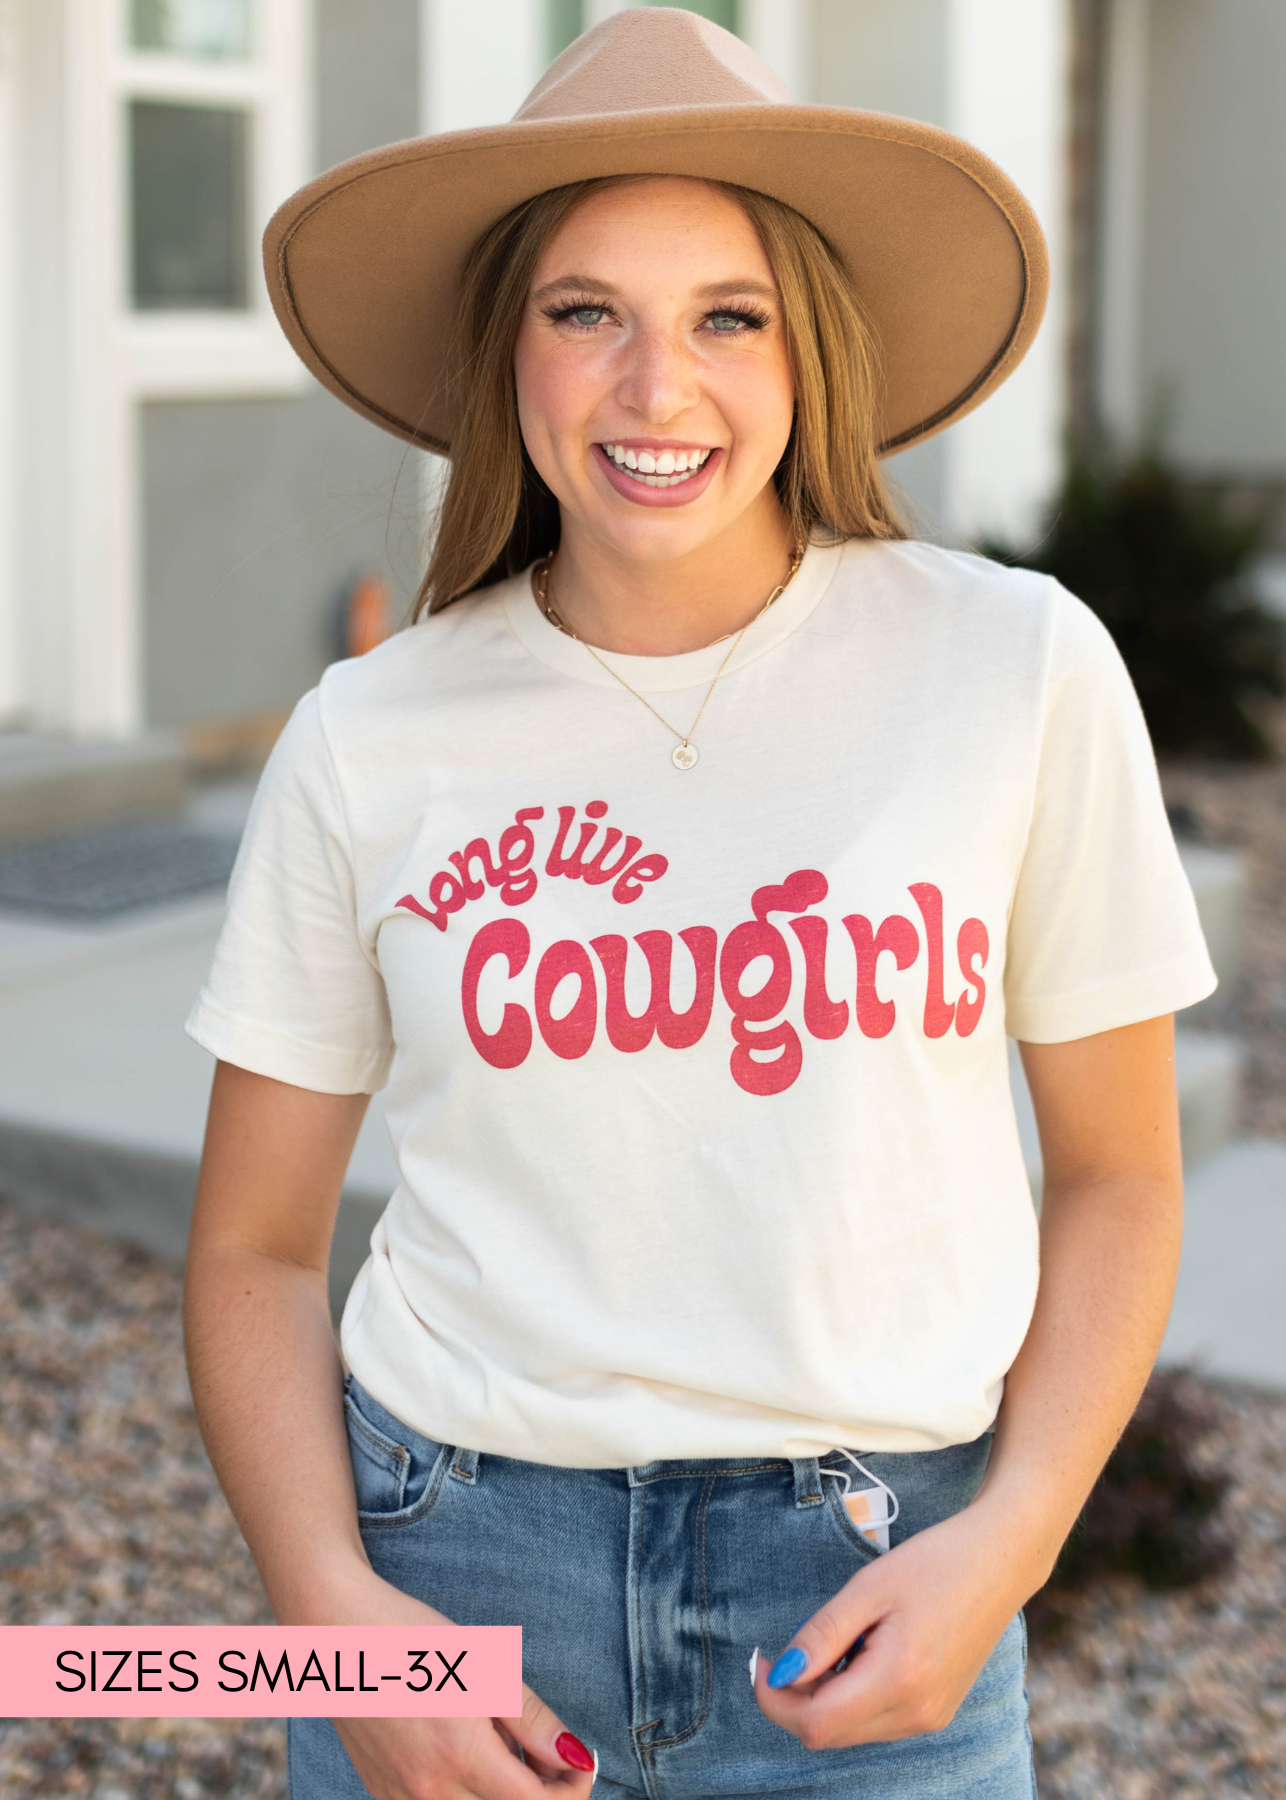 Long live cowgirls cream top